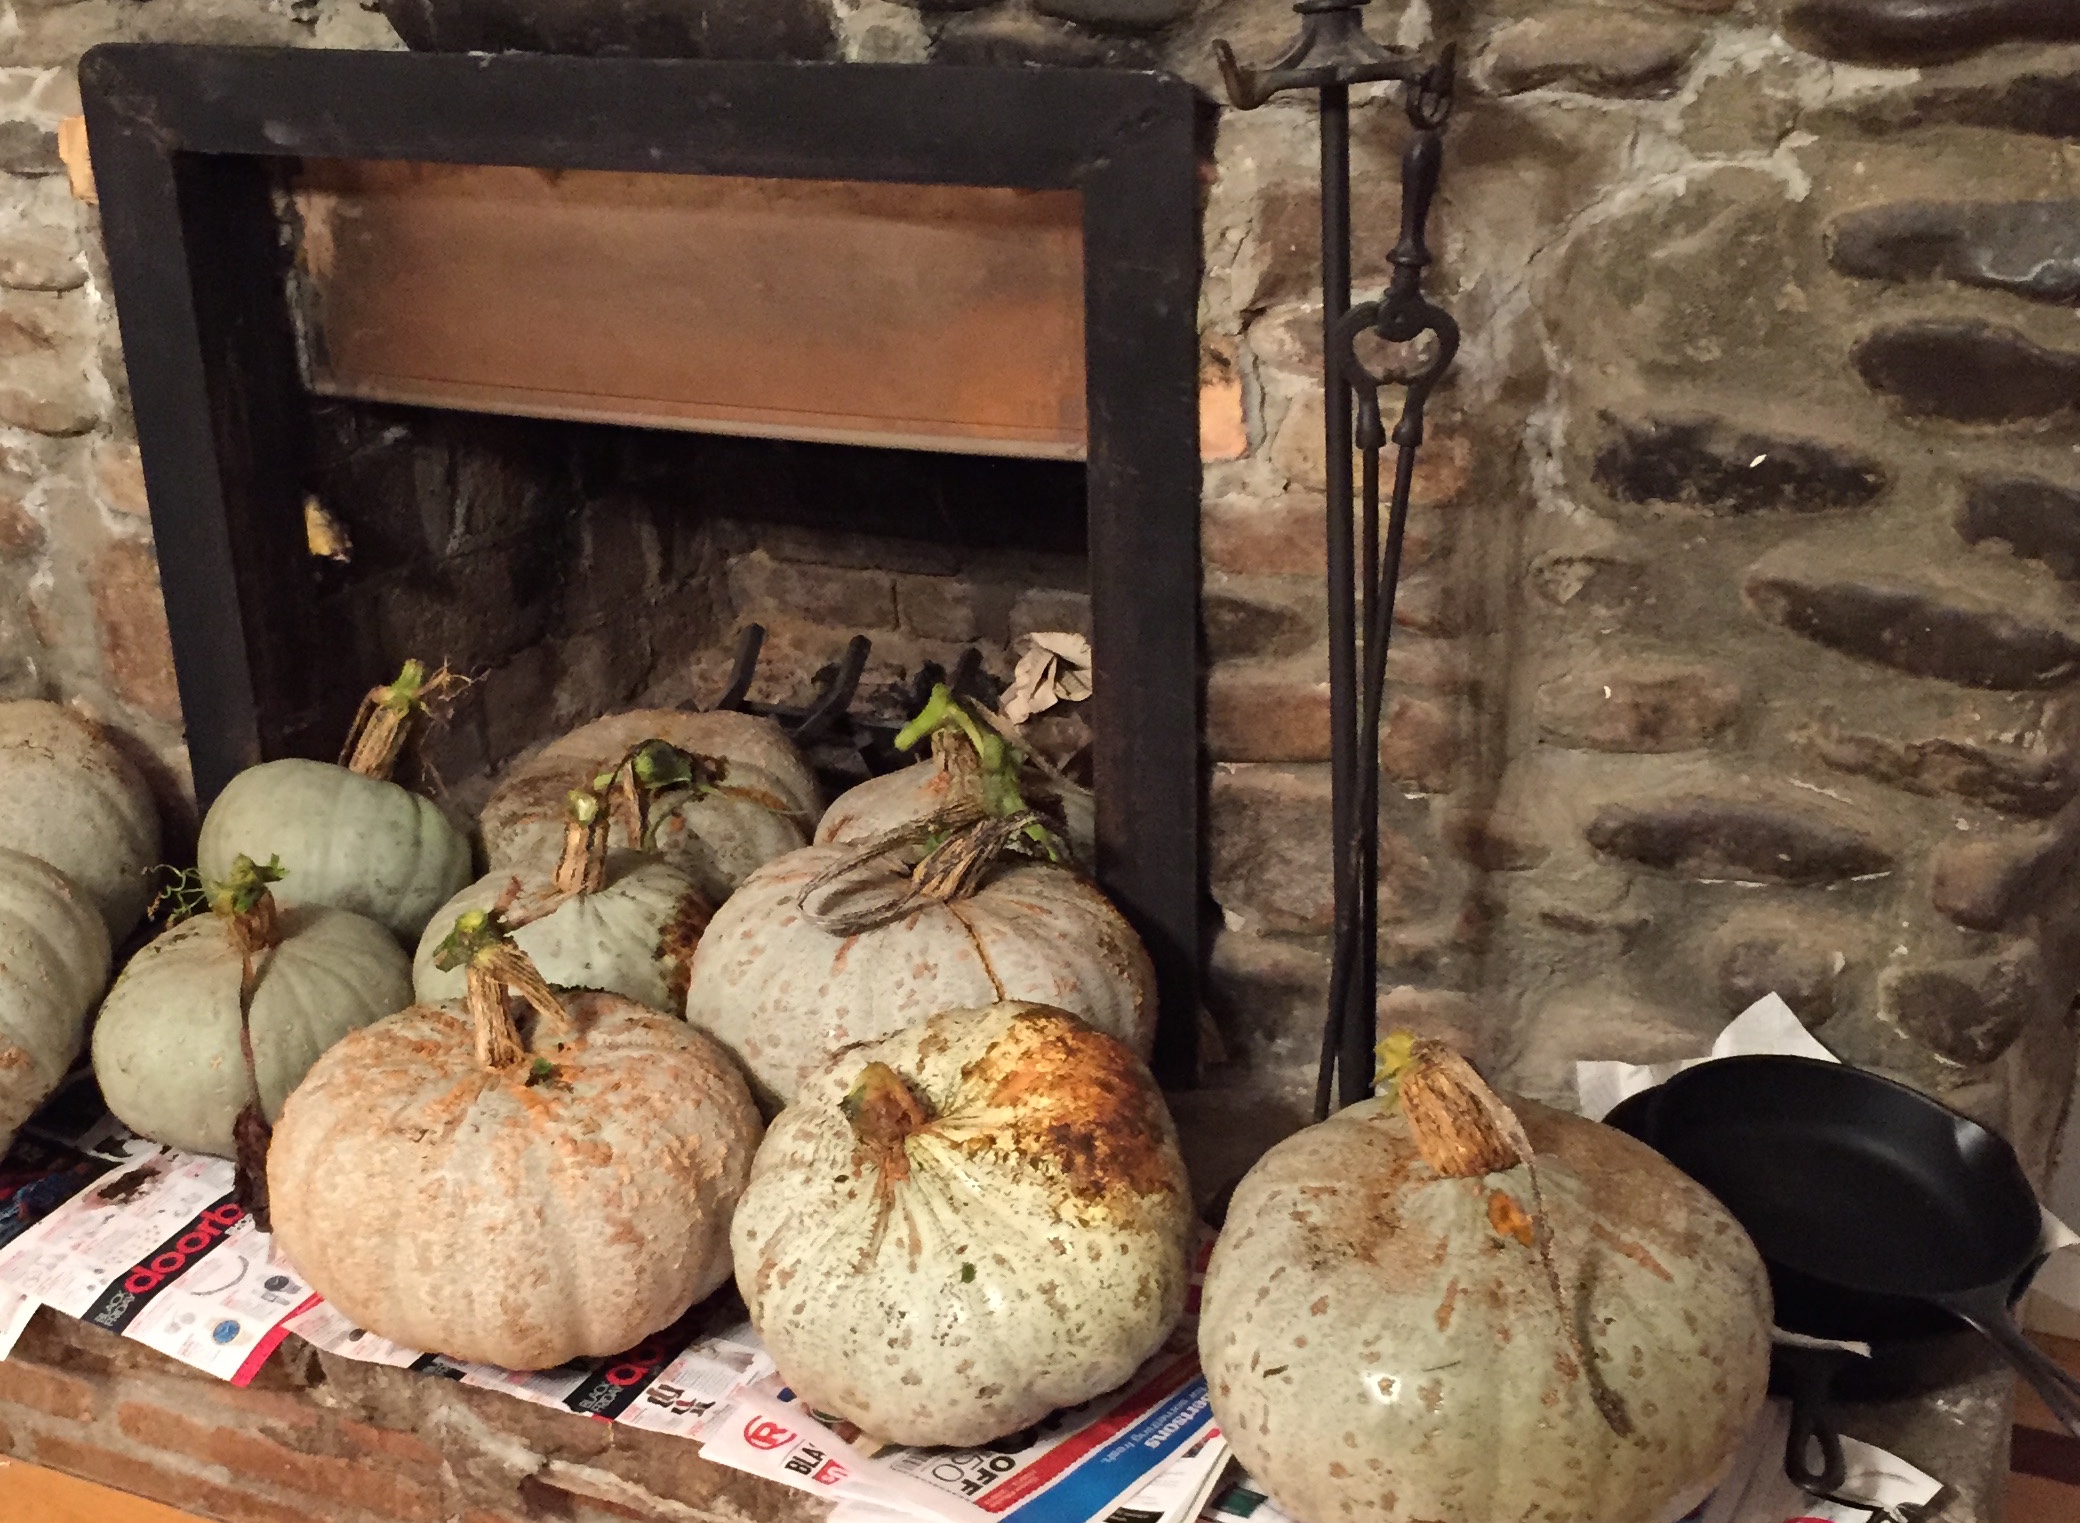 Sweetmeat squash curing on the fireplace hearth.